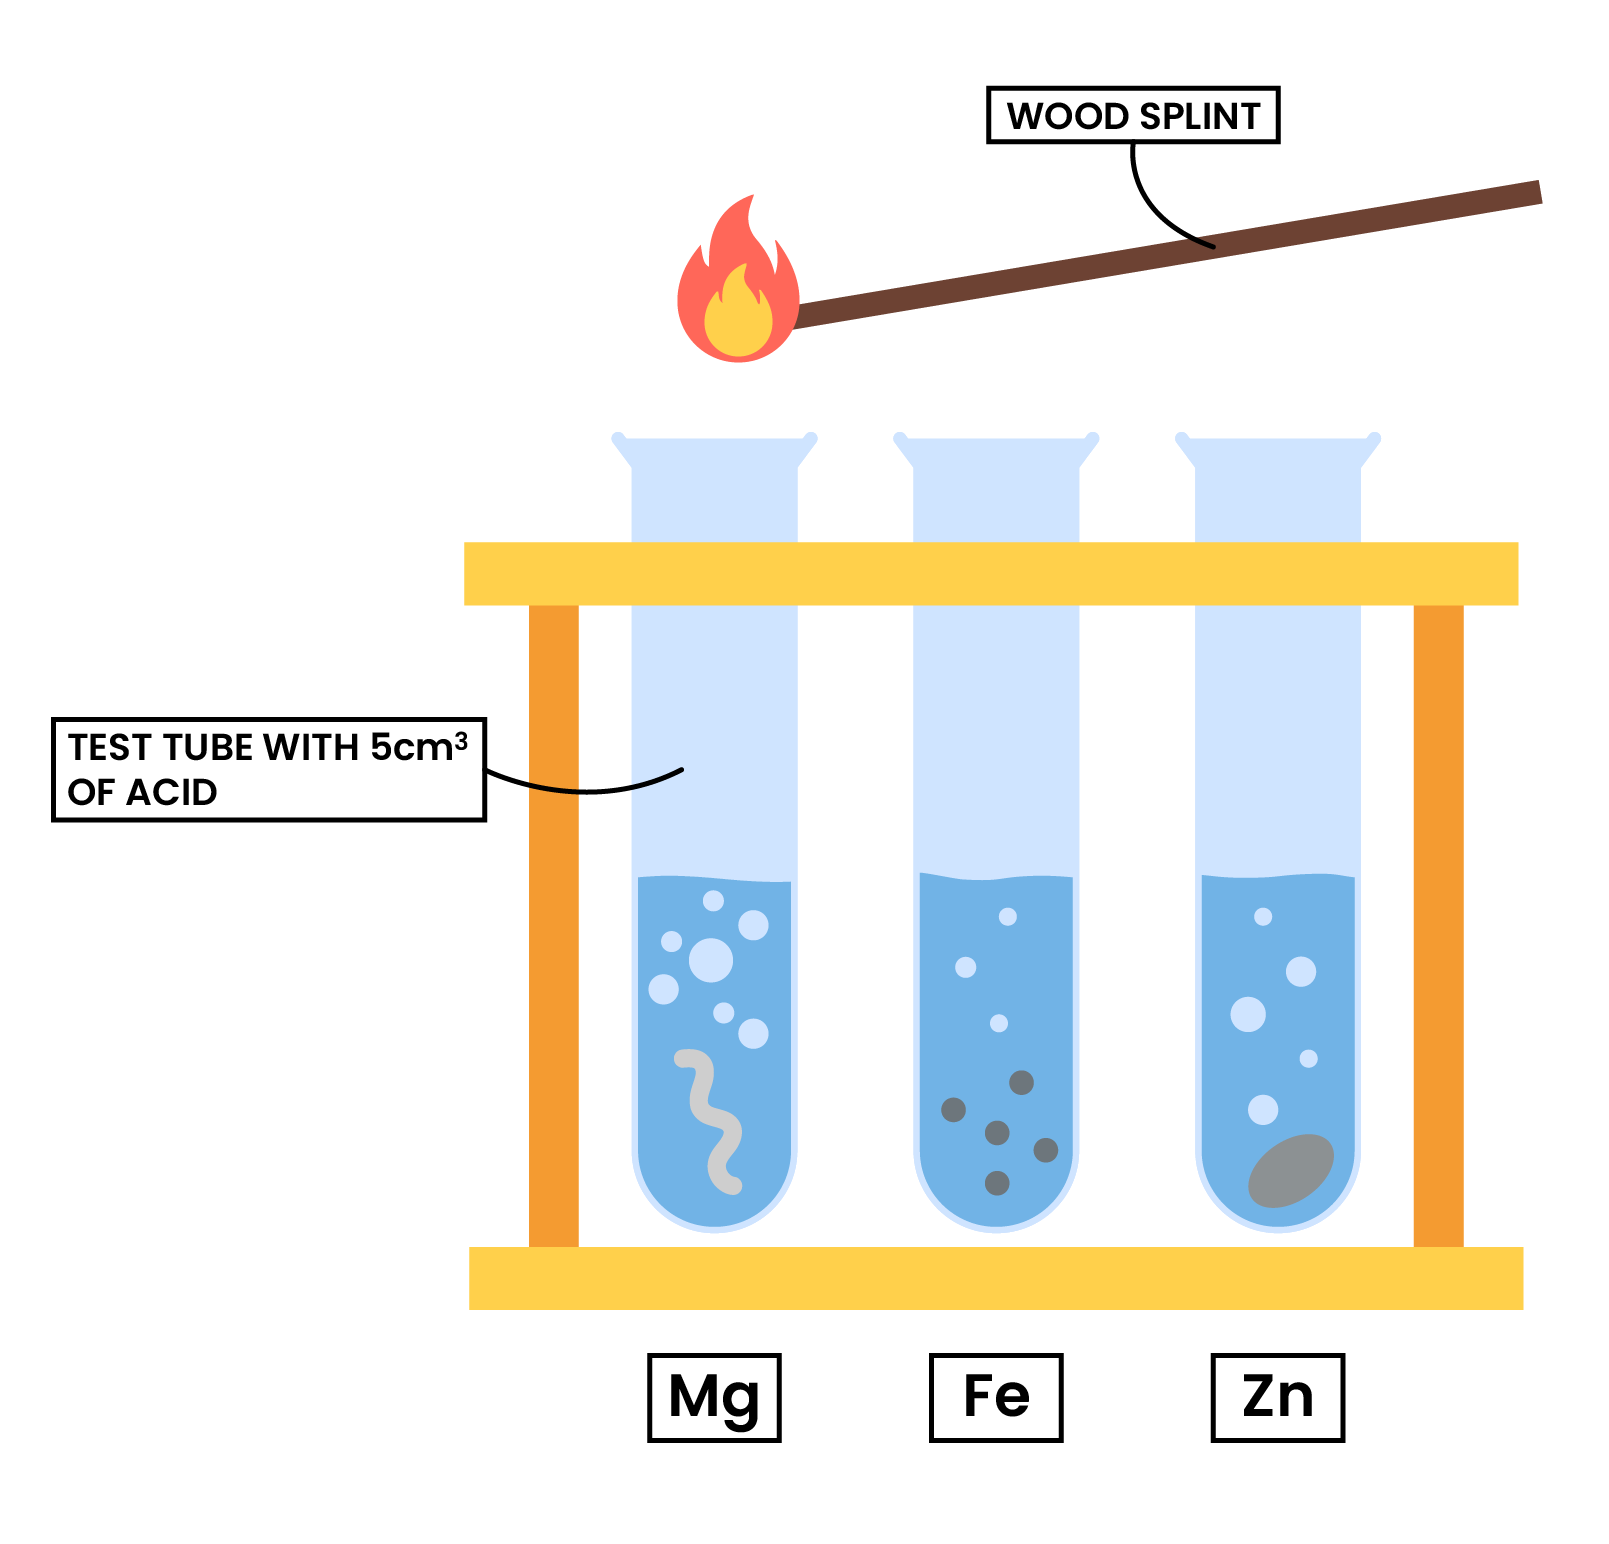 edexcel_igcse_chemistry_topic 13_reactivity series_005_reaction of metals with water hydrogen test diagram